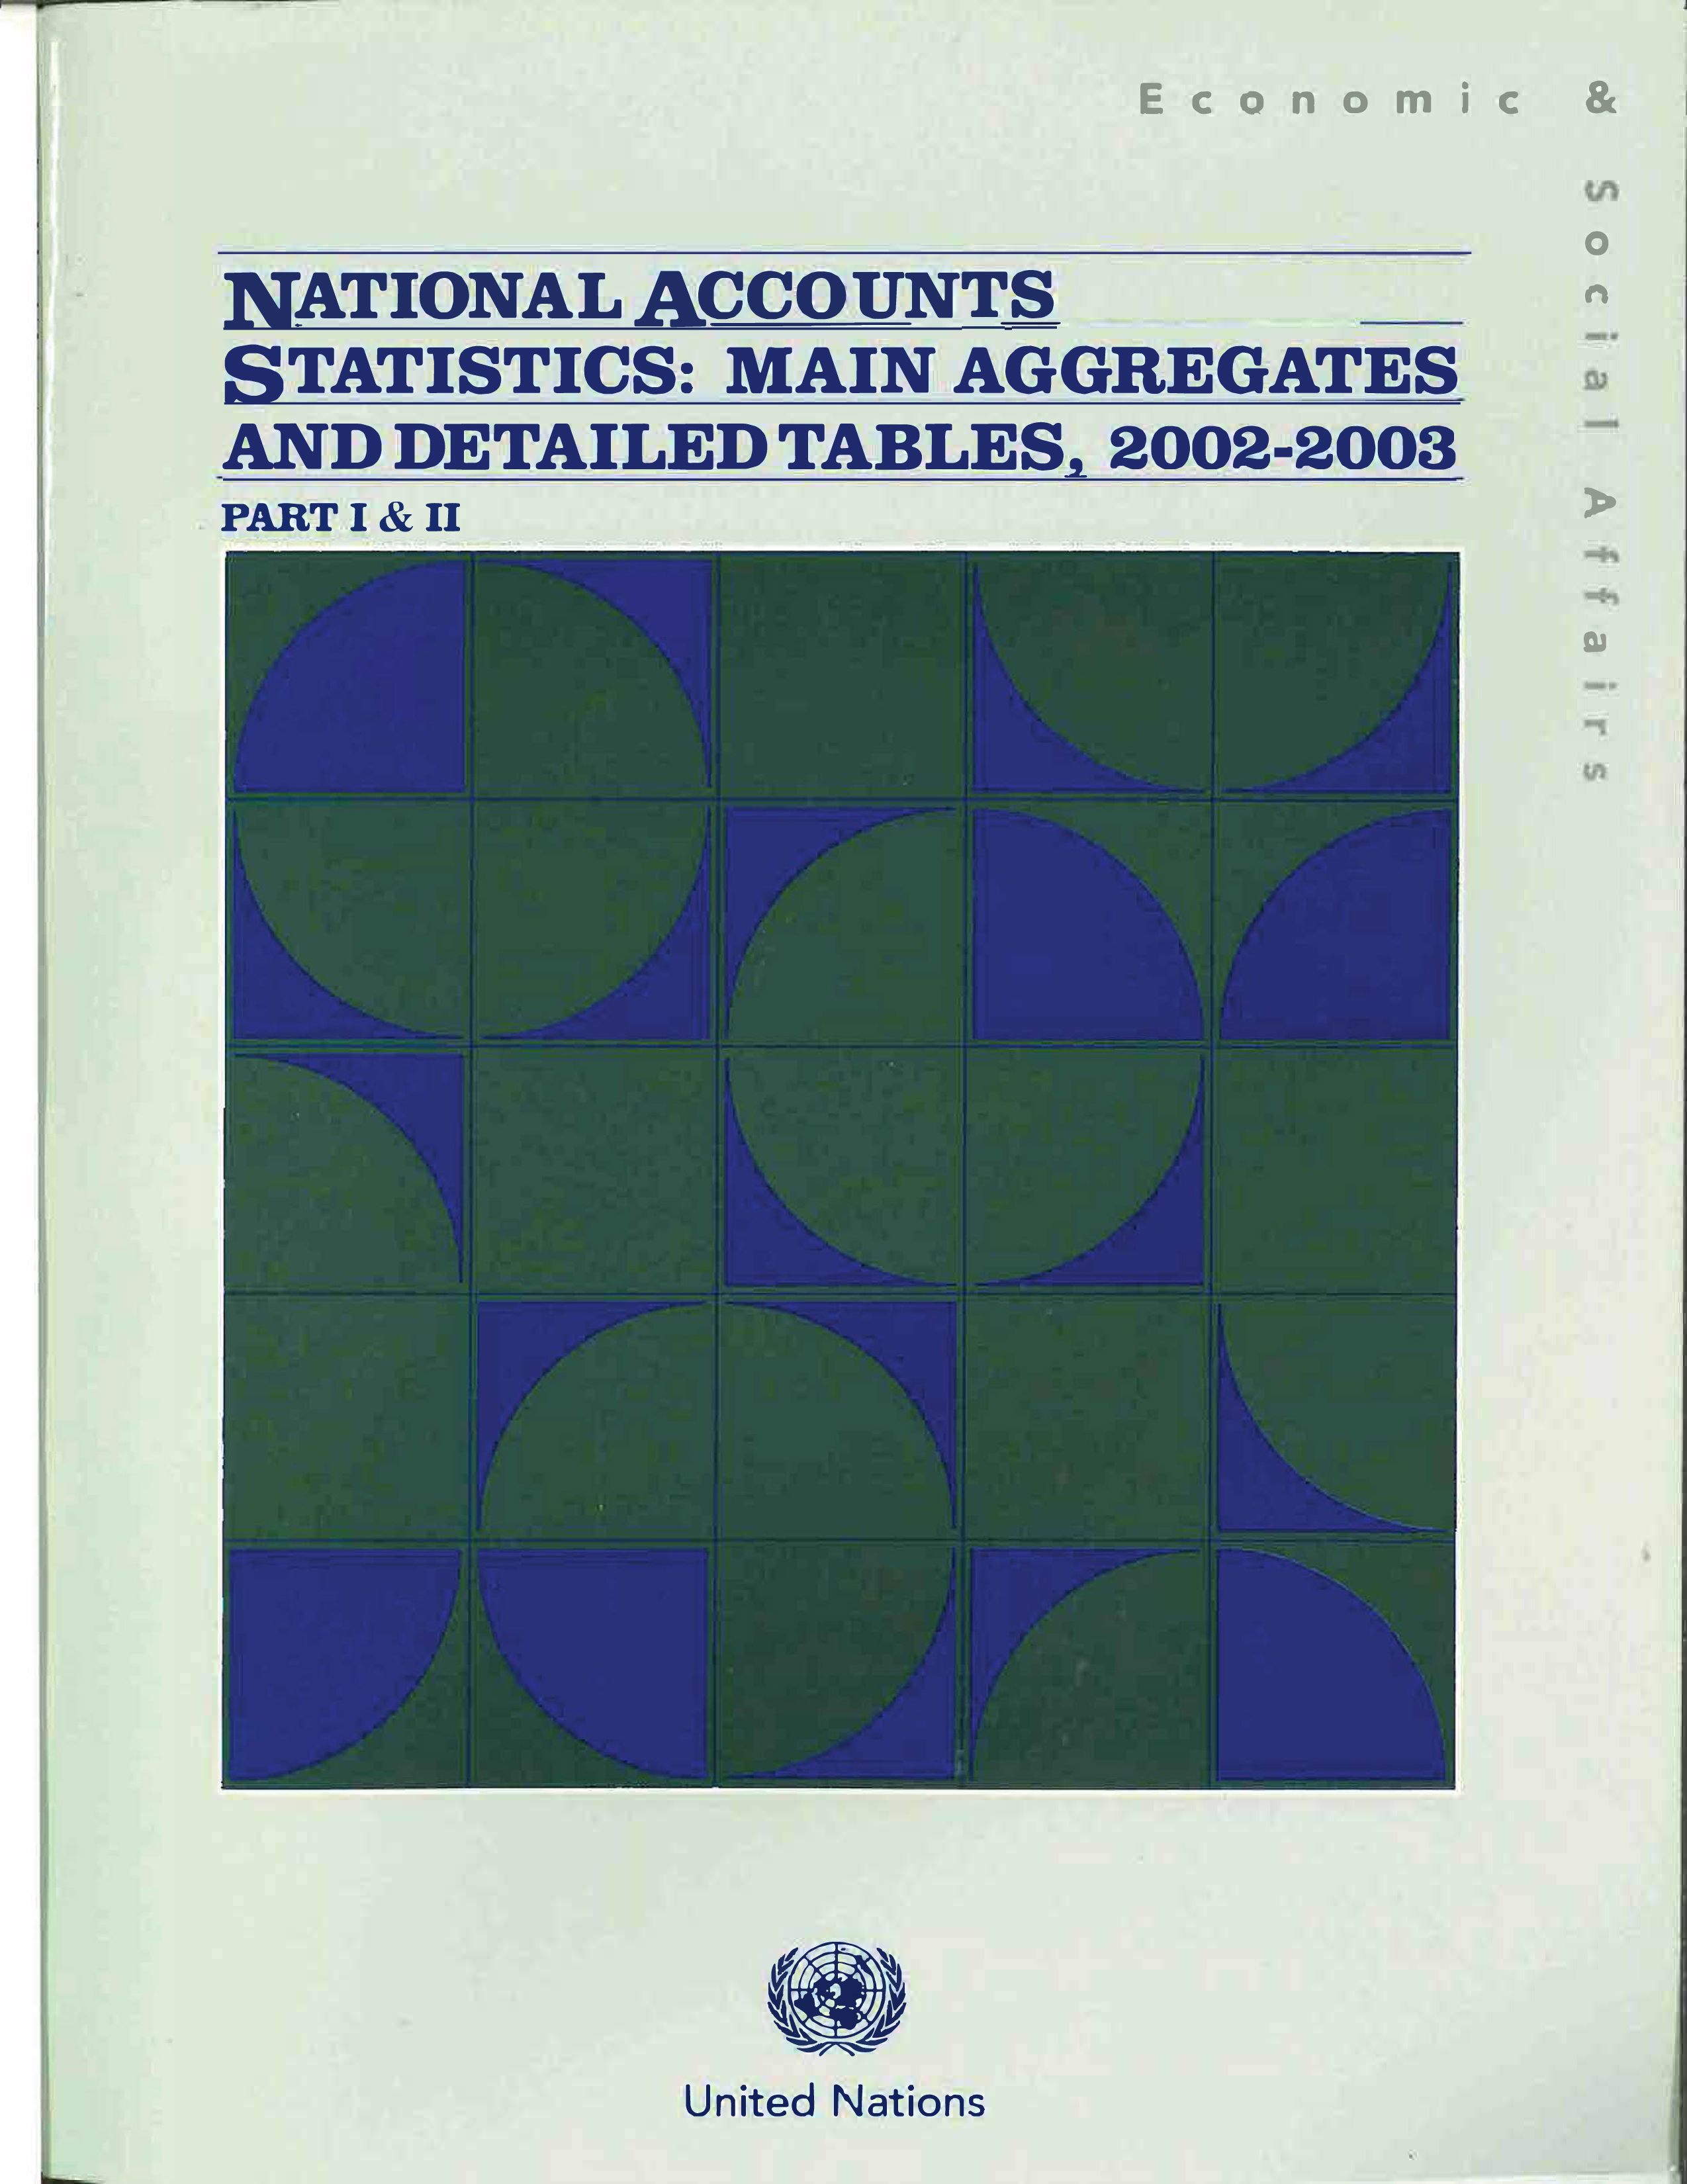 image of National Accounts Statistics: Main Aggregates and Detailed Tables 2002-2003